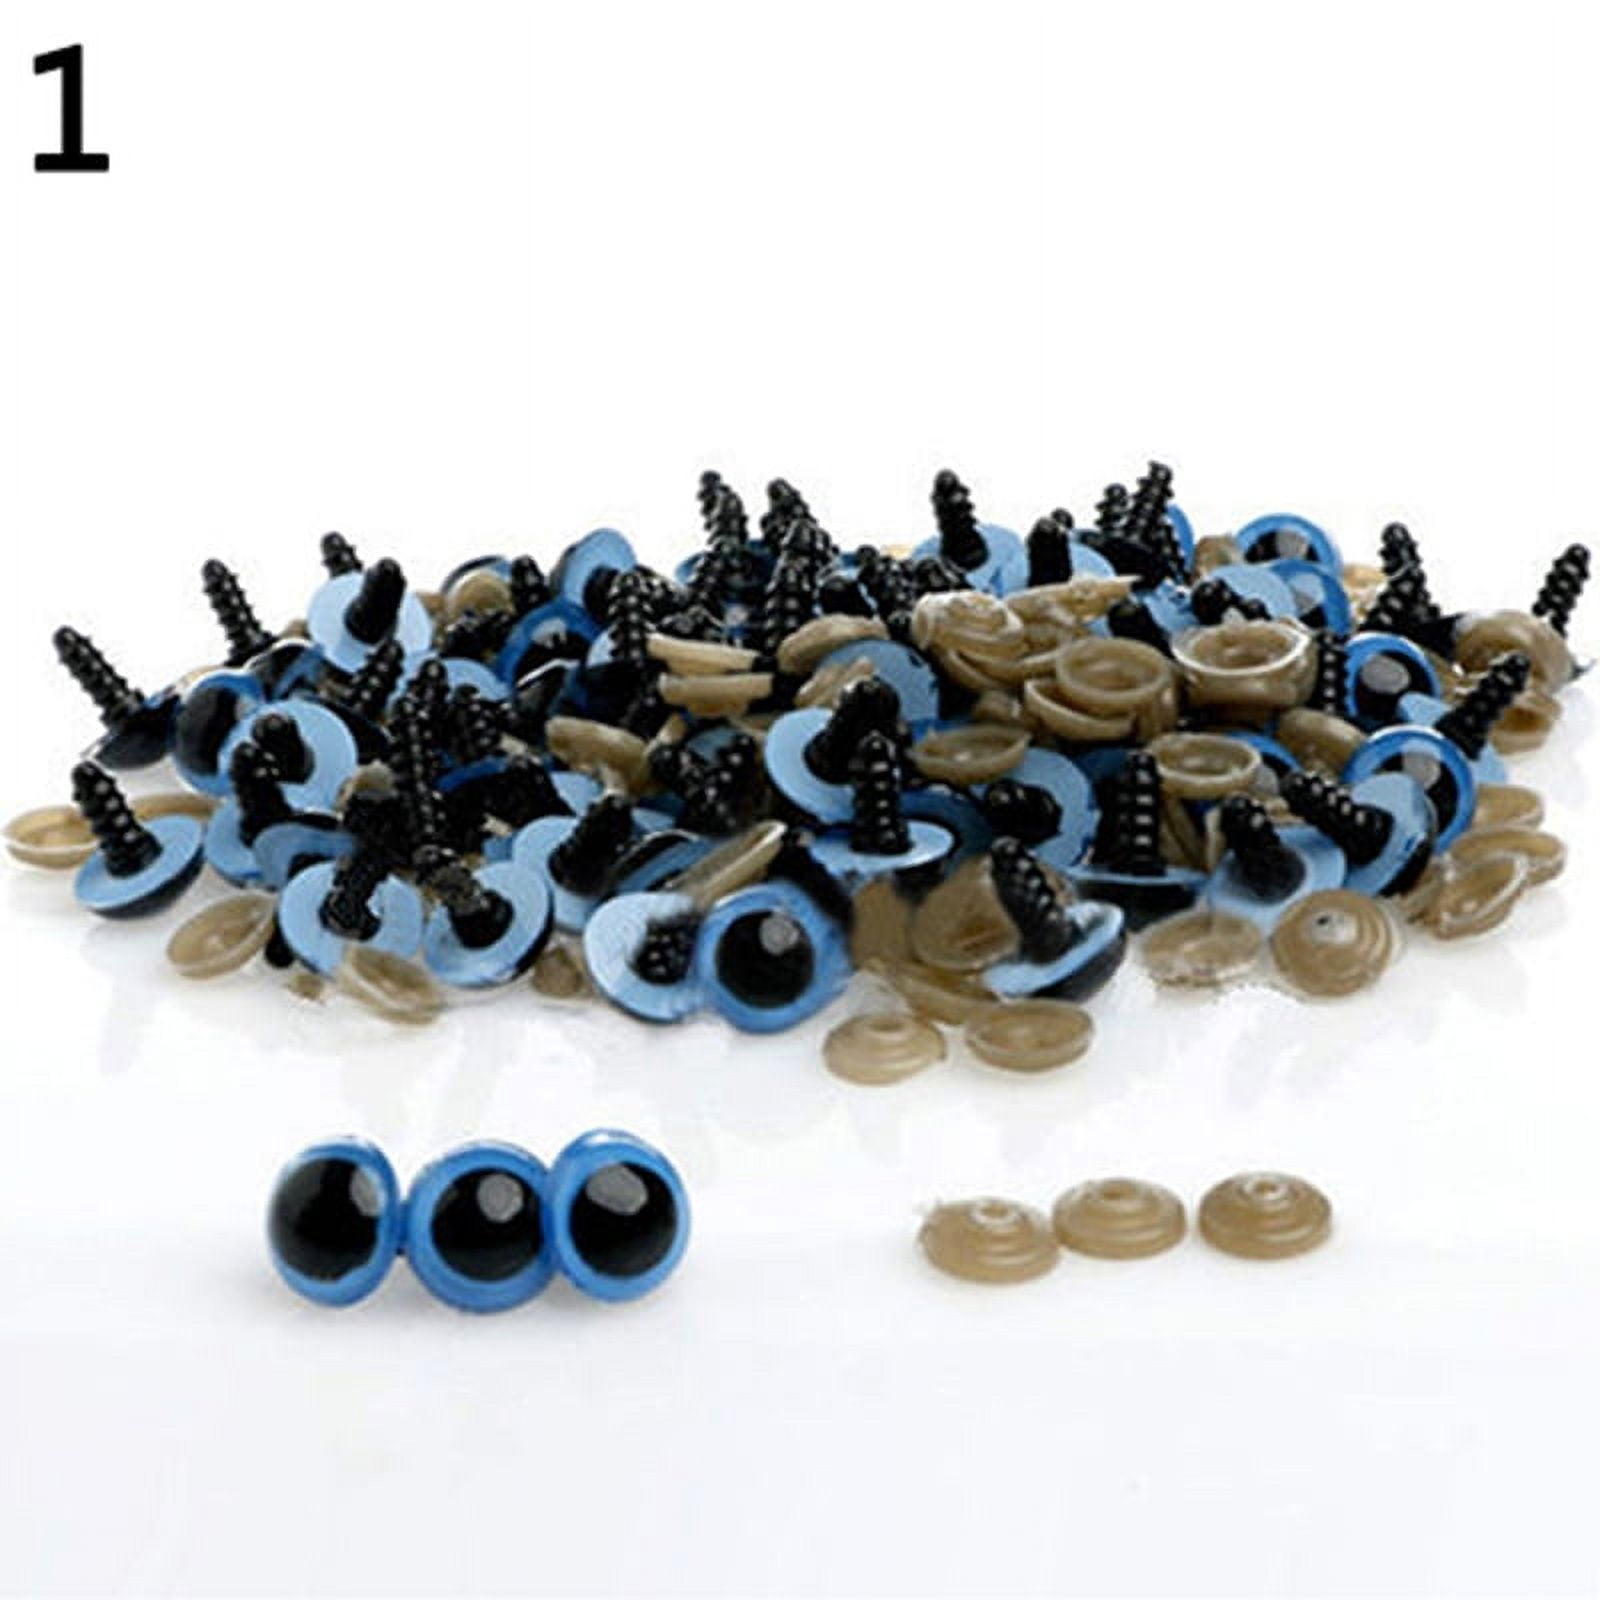 Baby Products Online - Haobase 100pcs 10mm 5 Colors Plastic Safety